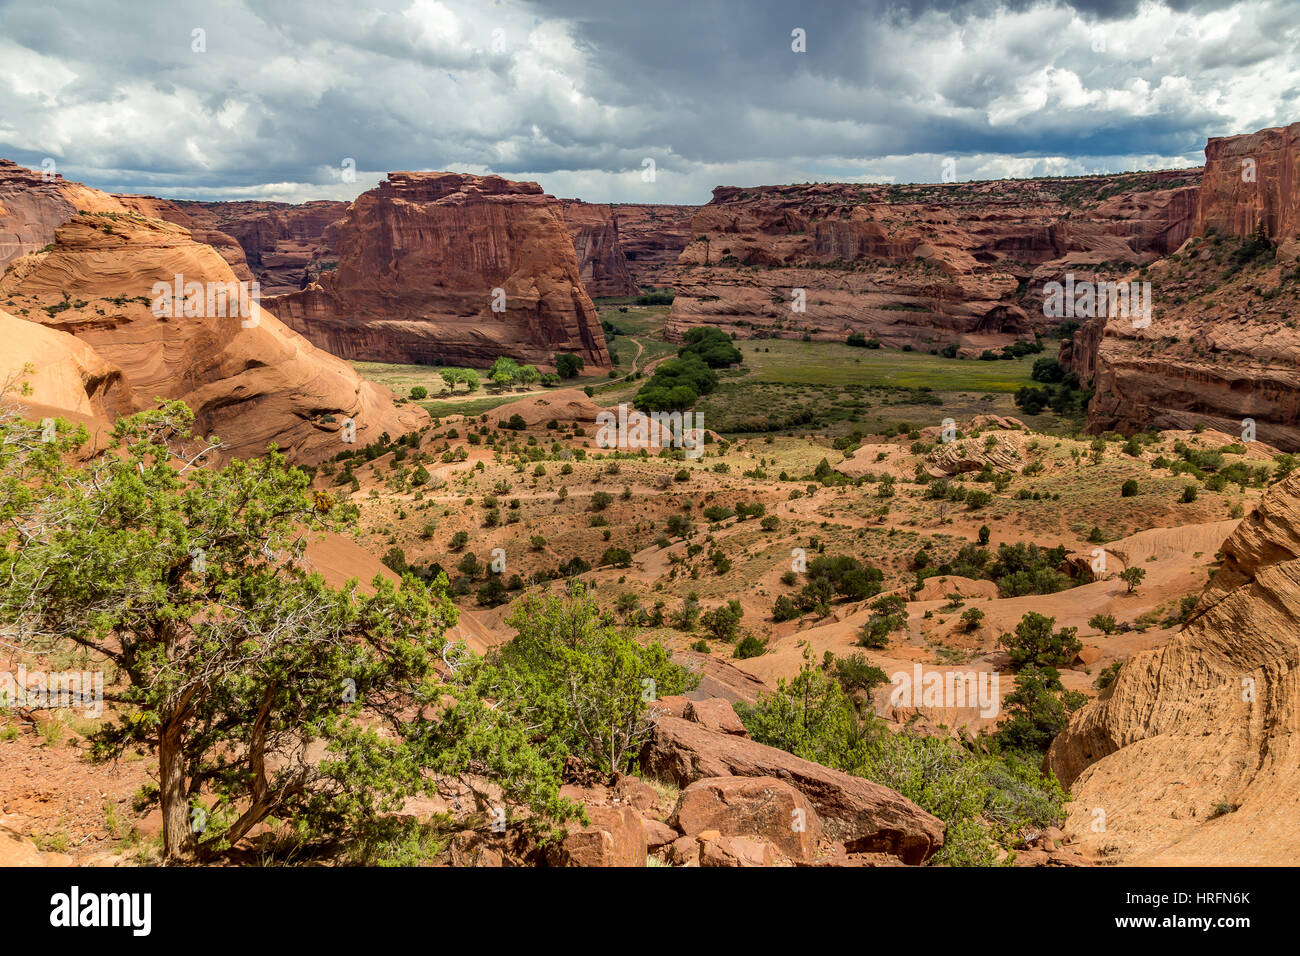 The Canyon de Chelly National Monument consists of many well-preserved Anasazi ruins and spectacular sheer red cliffs that rise up to 1000 feet. Stock Photo